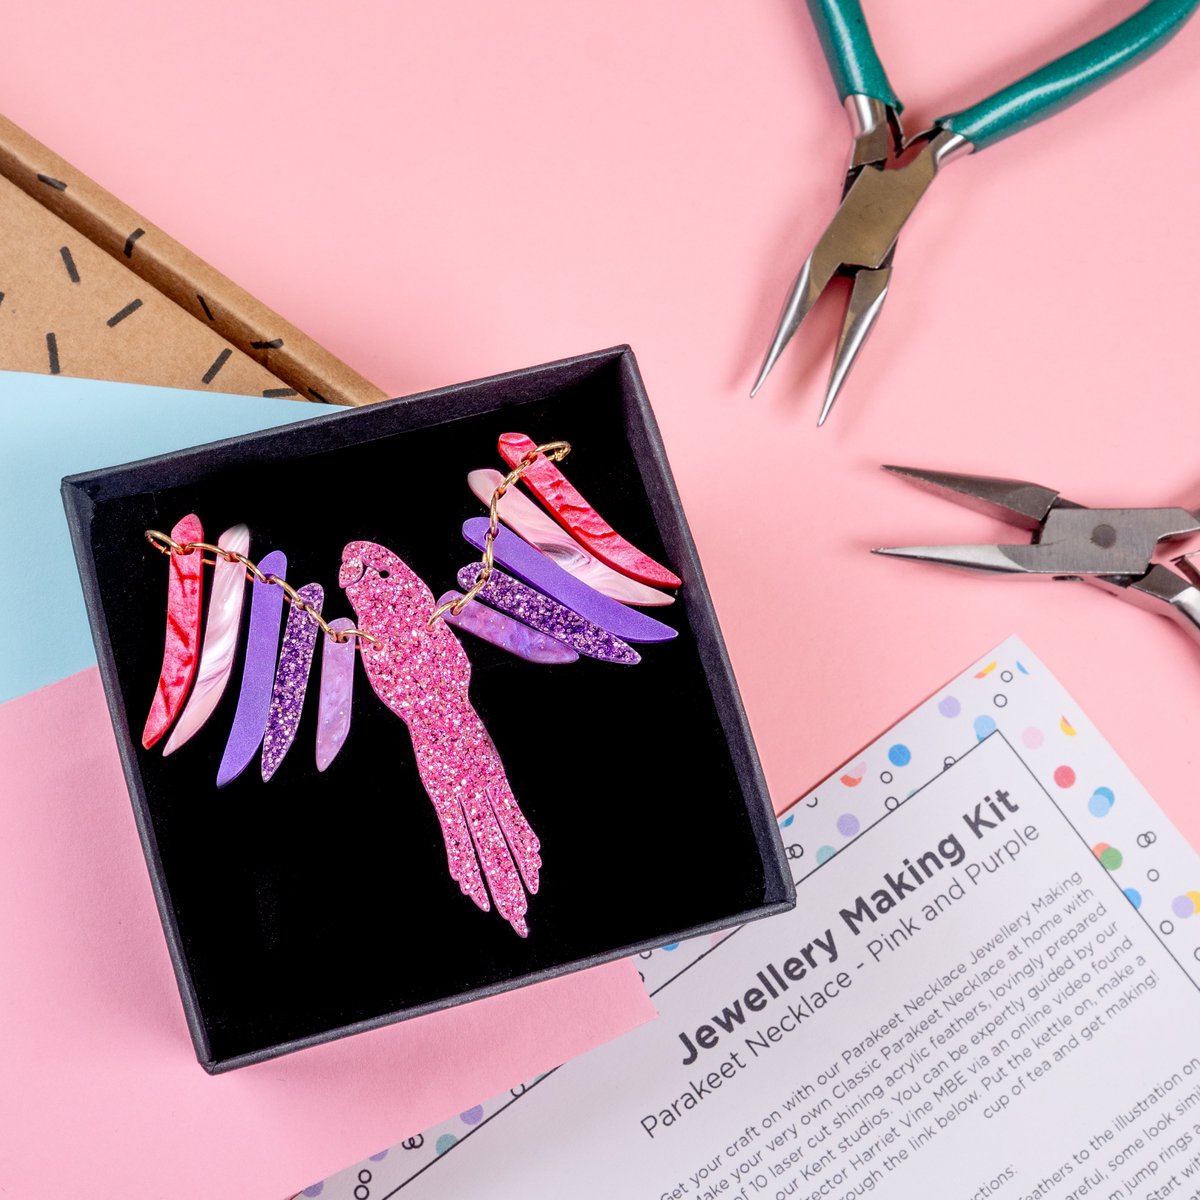 MAKE IT YOURSELF! 🙌 Channel your inner jewellery maker with our crafty workshop in a box, with six fun designs to choose from: bit.ly/3IfvFJm #jewellerymakingkit